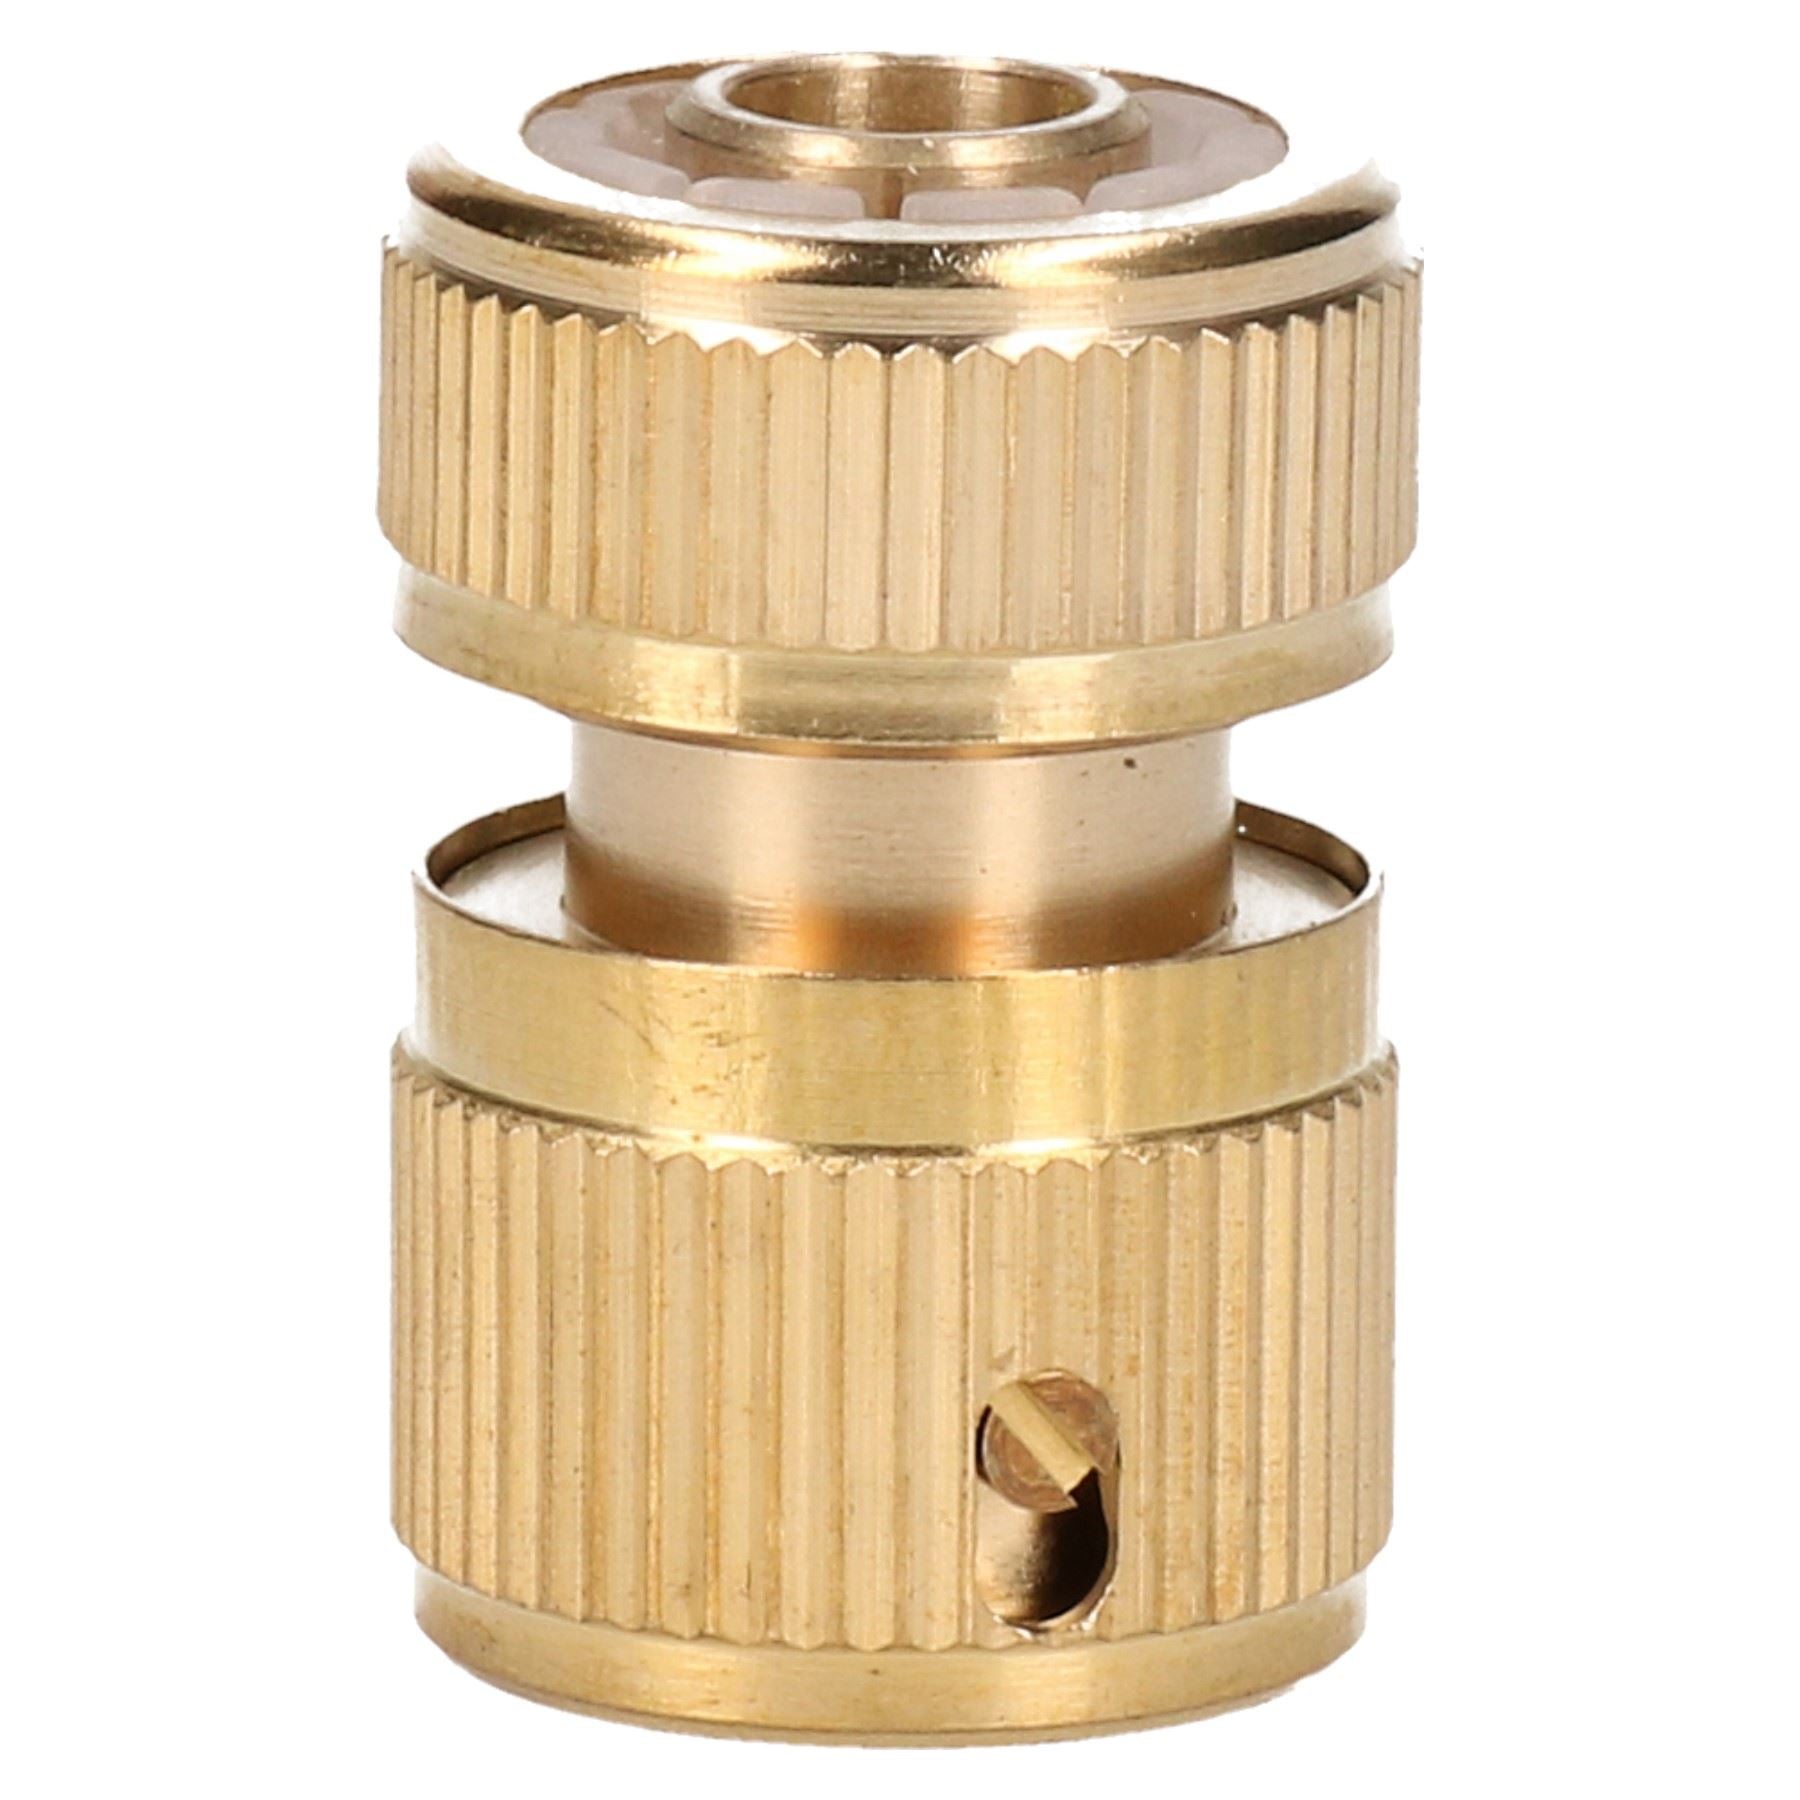 1/2" Brass Female Garden Hose Connector for Water Hose Pipes Quick Release